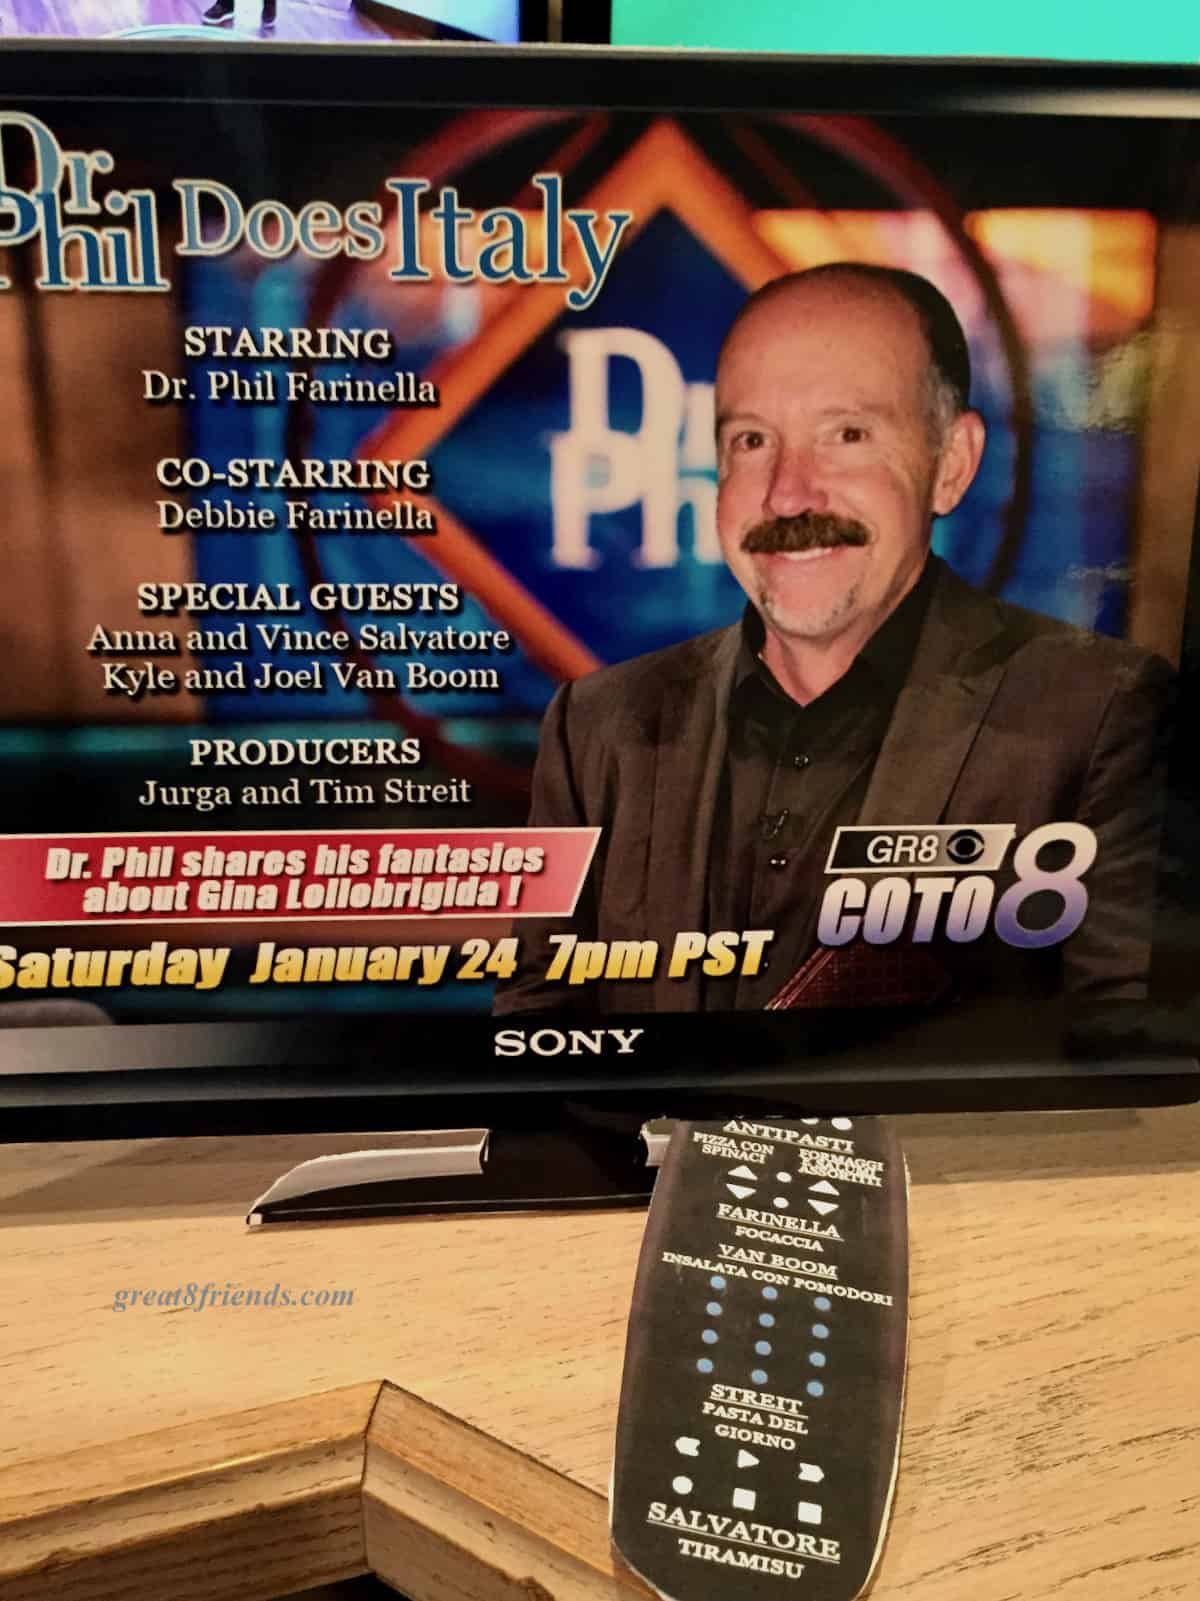 Dr Phil Does Italy Italian Dinner Party Invitation.